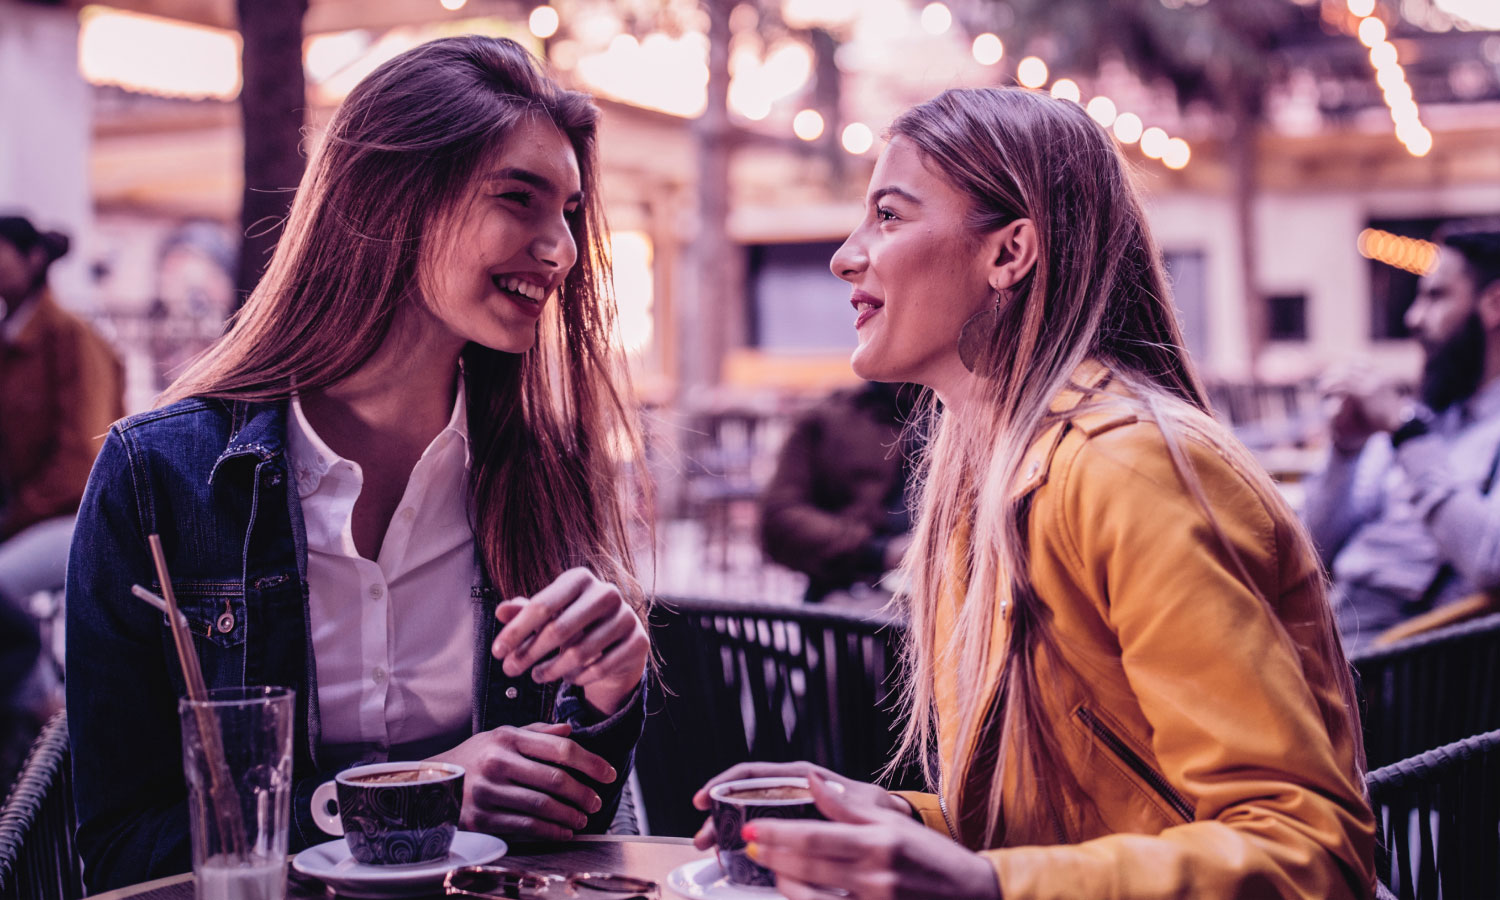 Photograph of two women having a friendly conversation over coffee